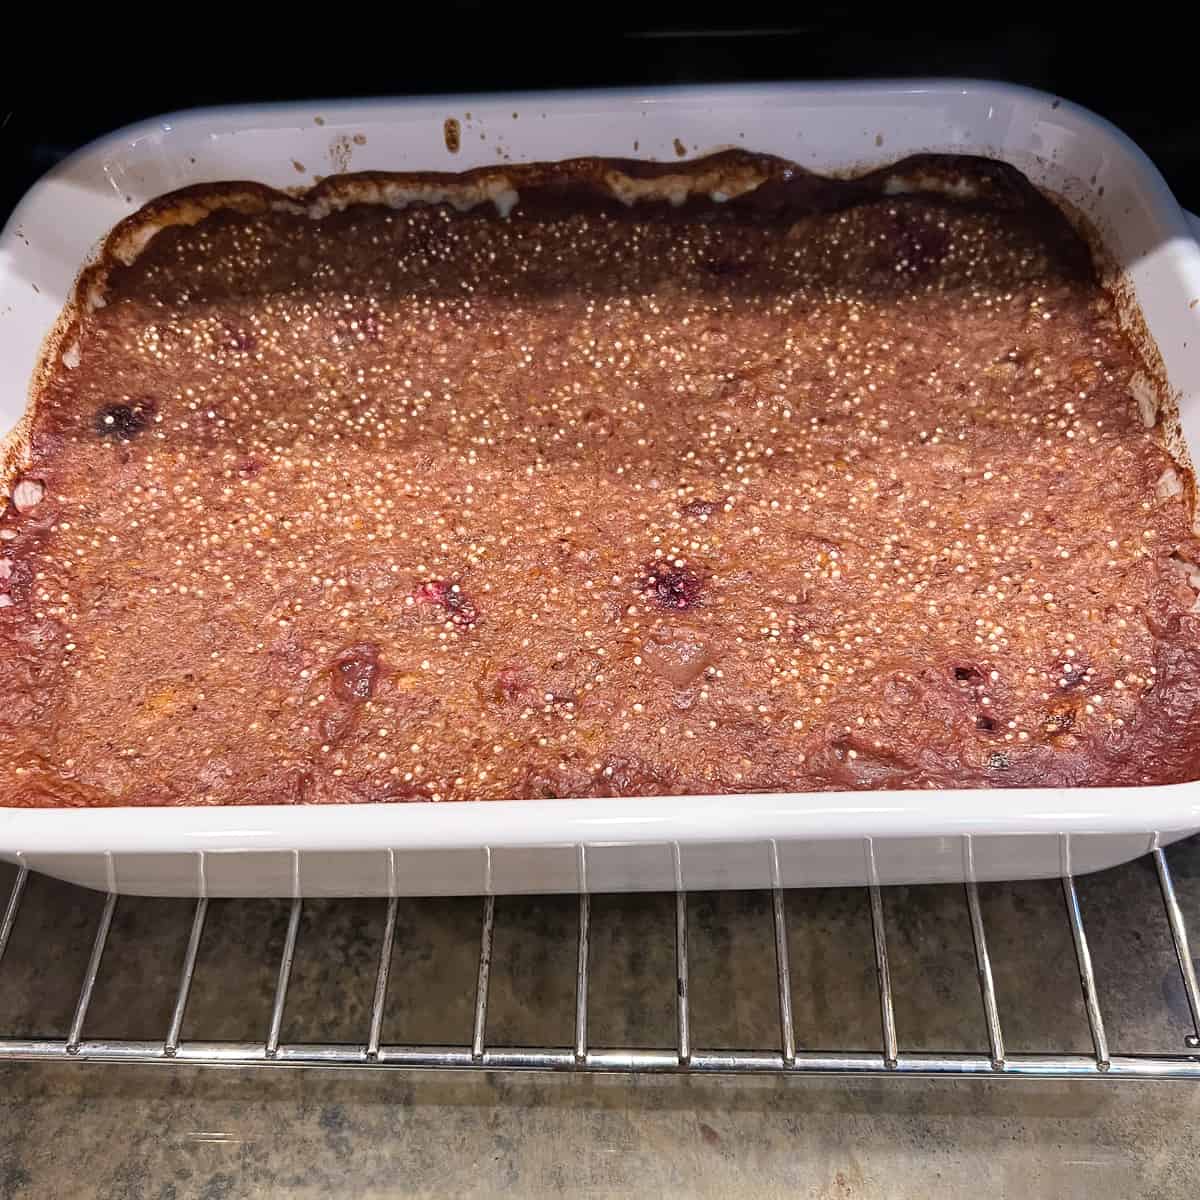 A casserole dish with cherry quinoa breakfast bake coming out of the oven.